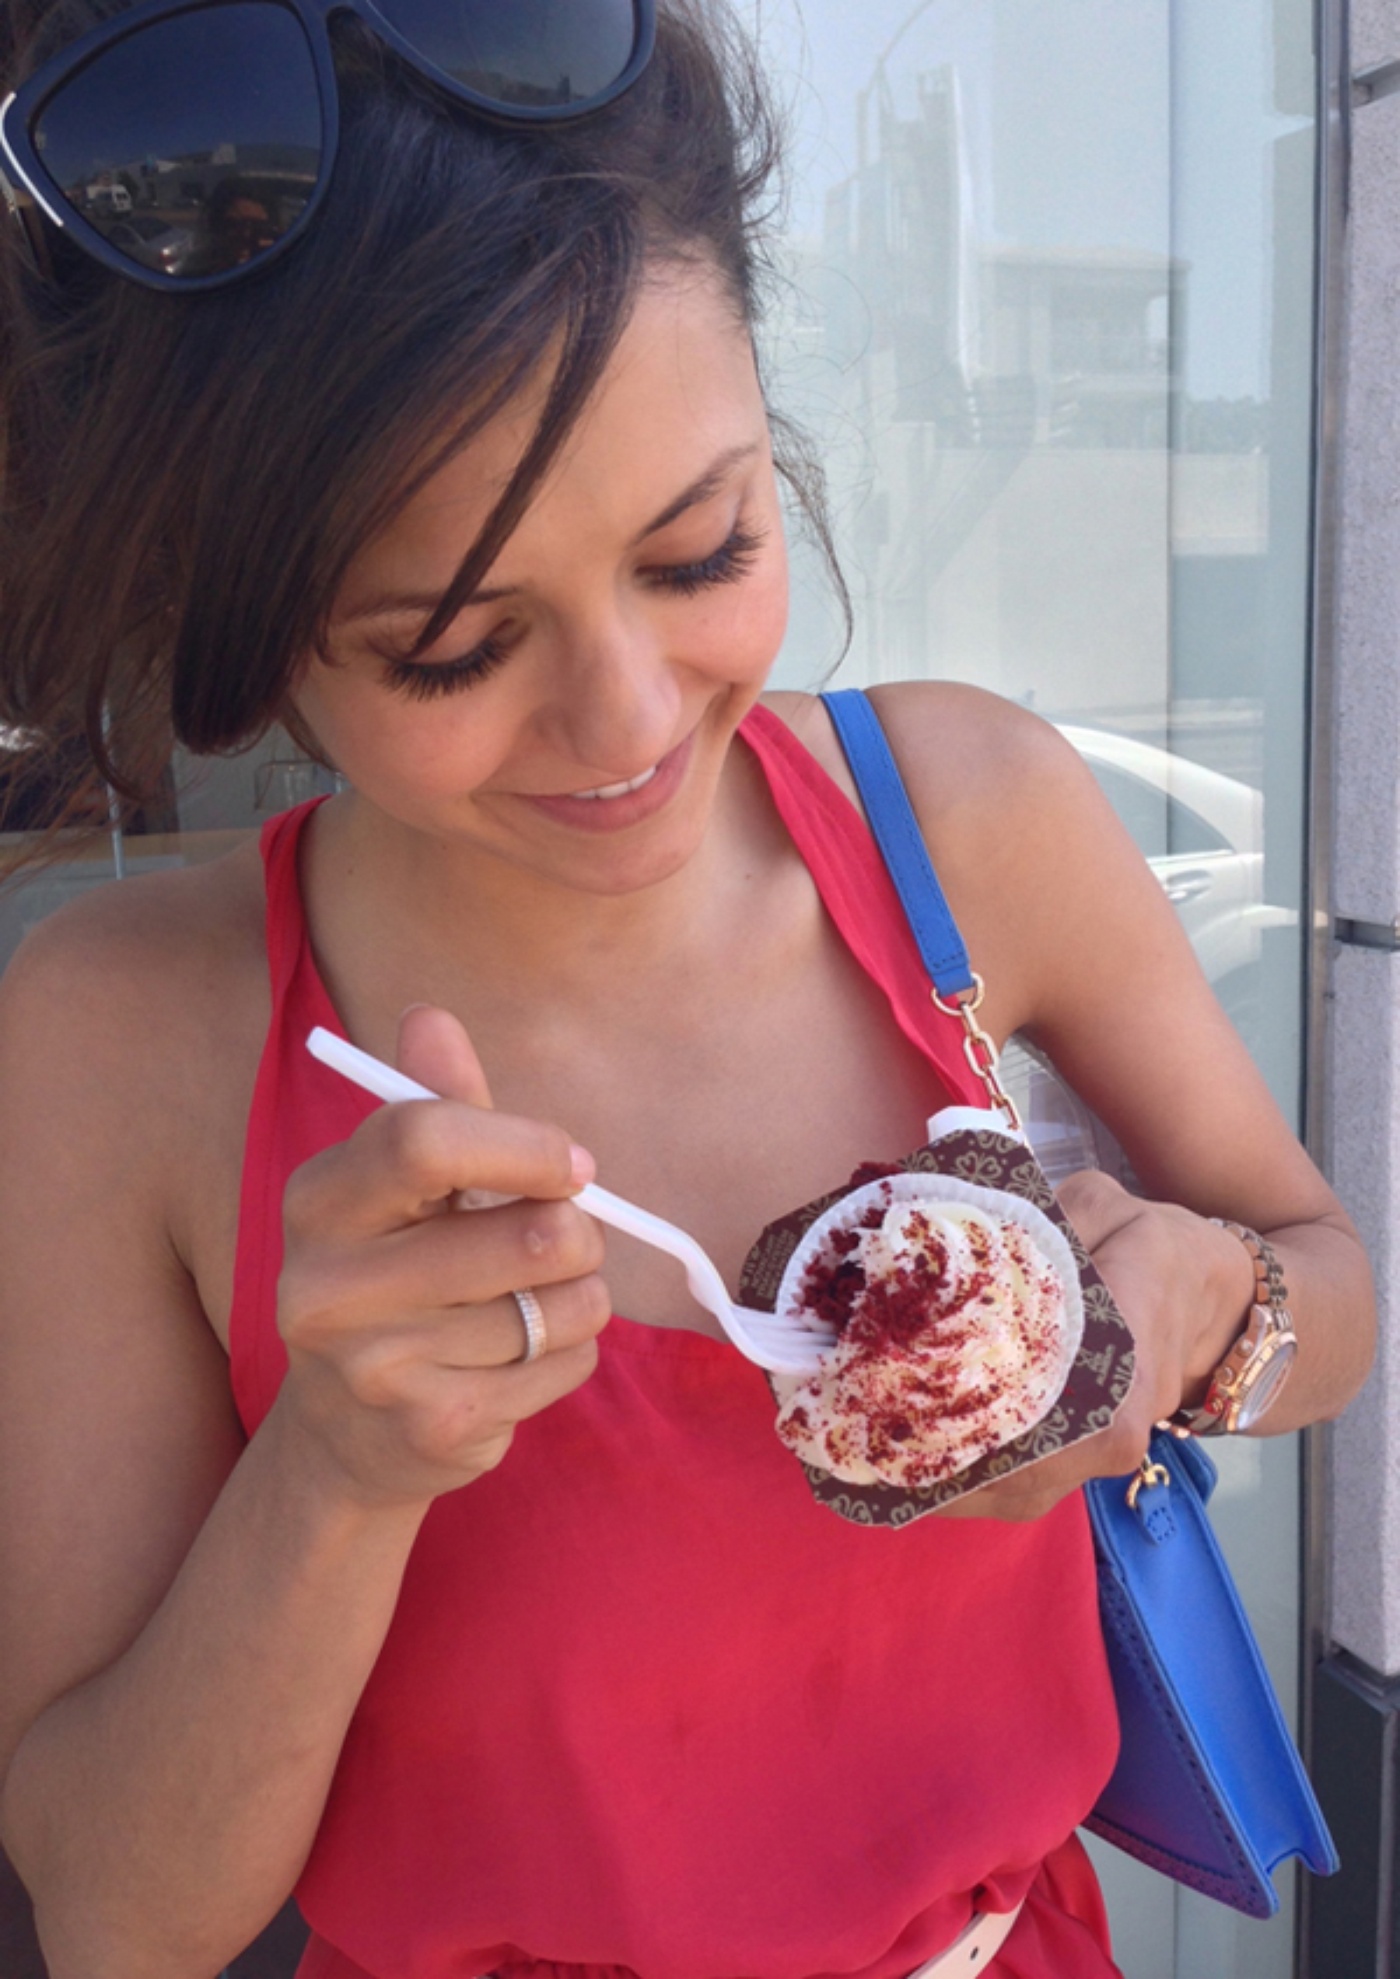 Nina Dobrev Eating Dessert submitted by Canary + Rook